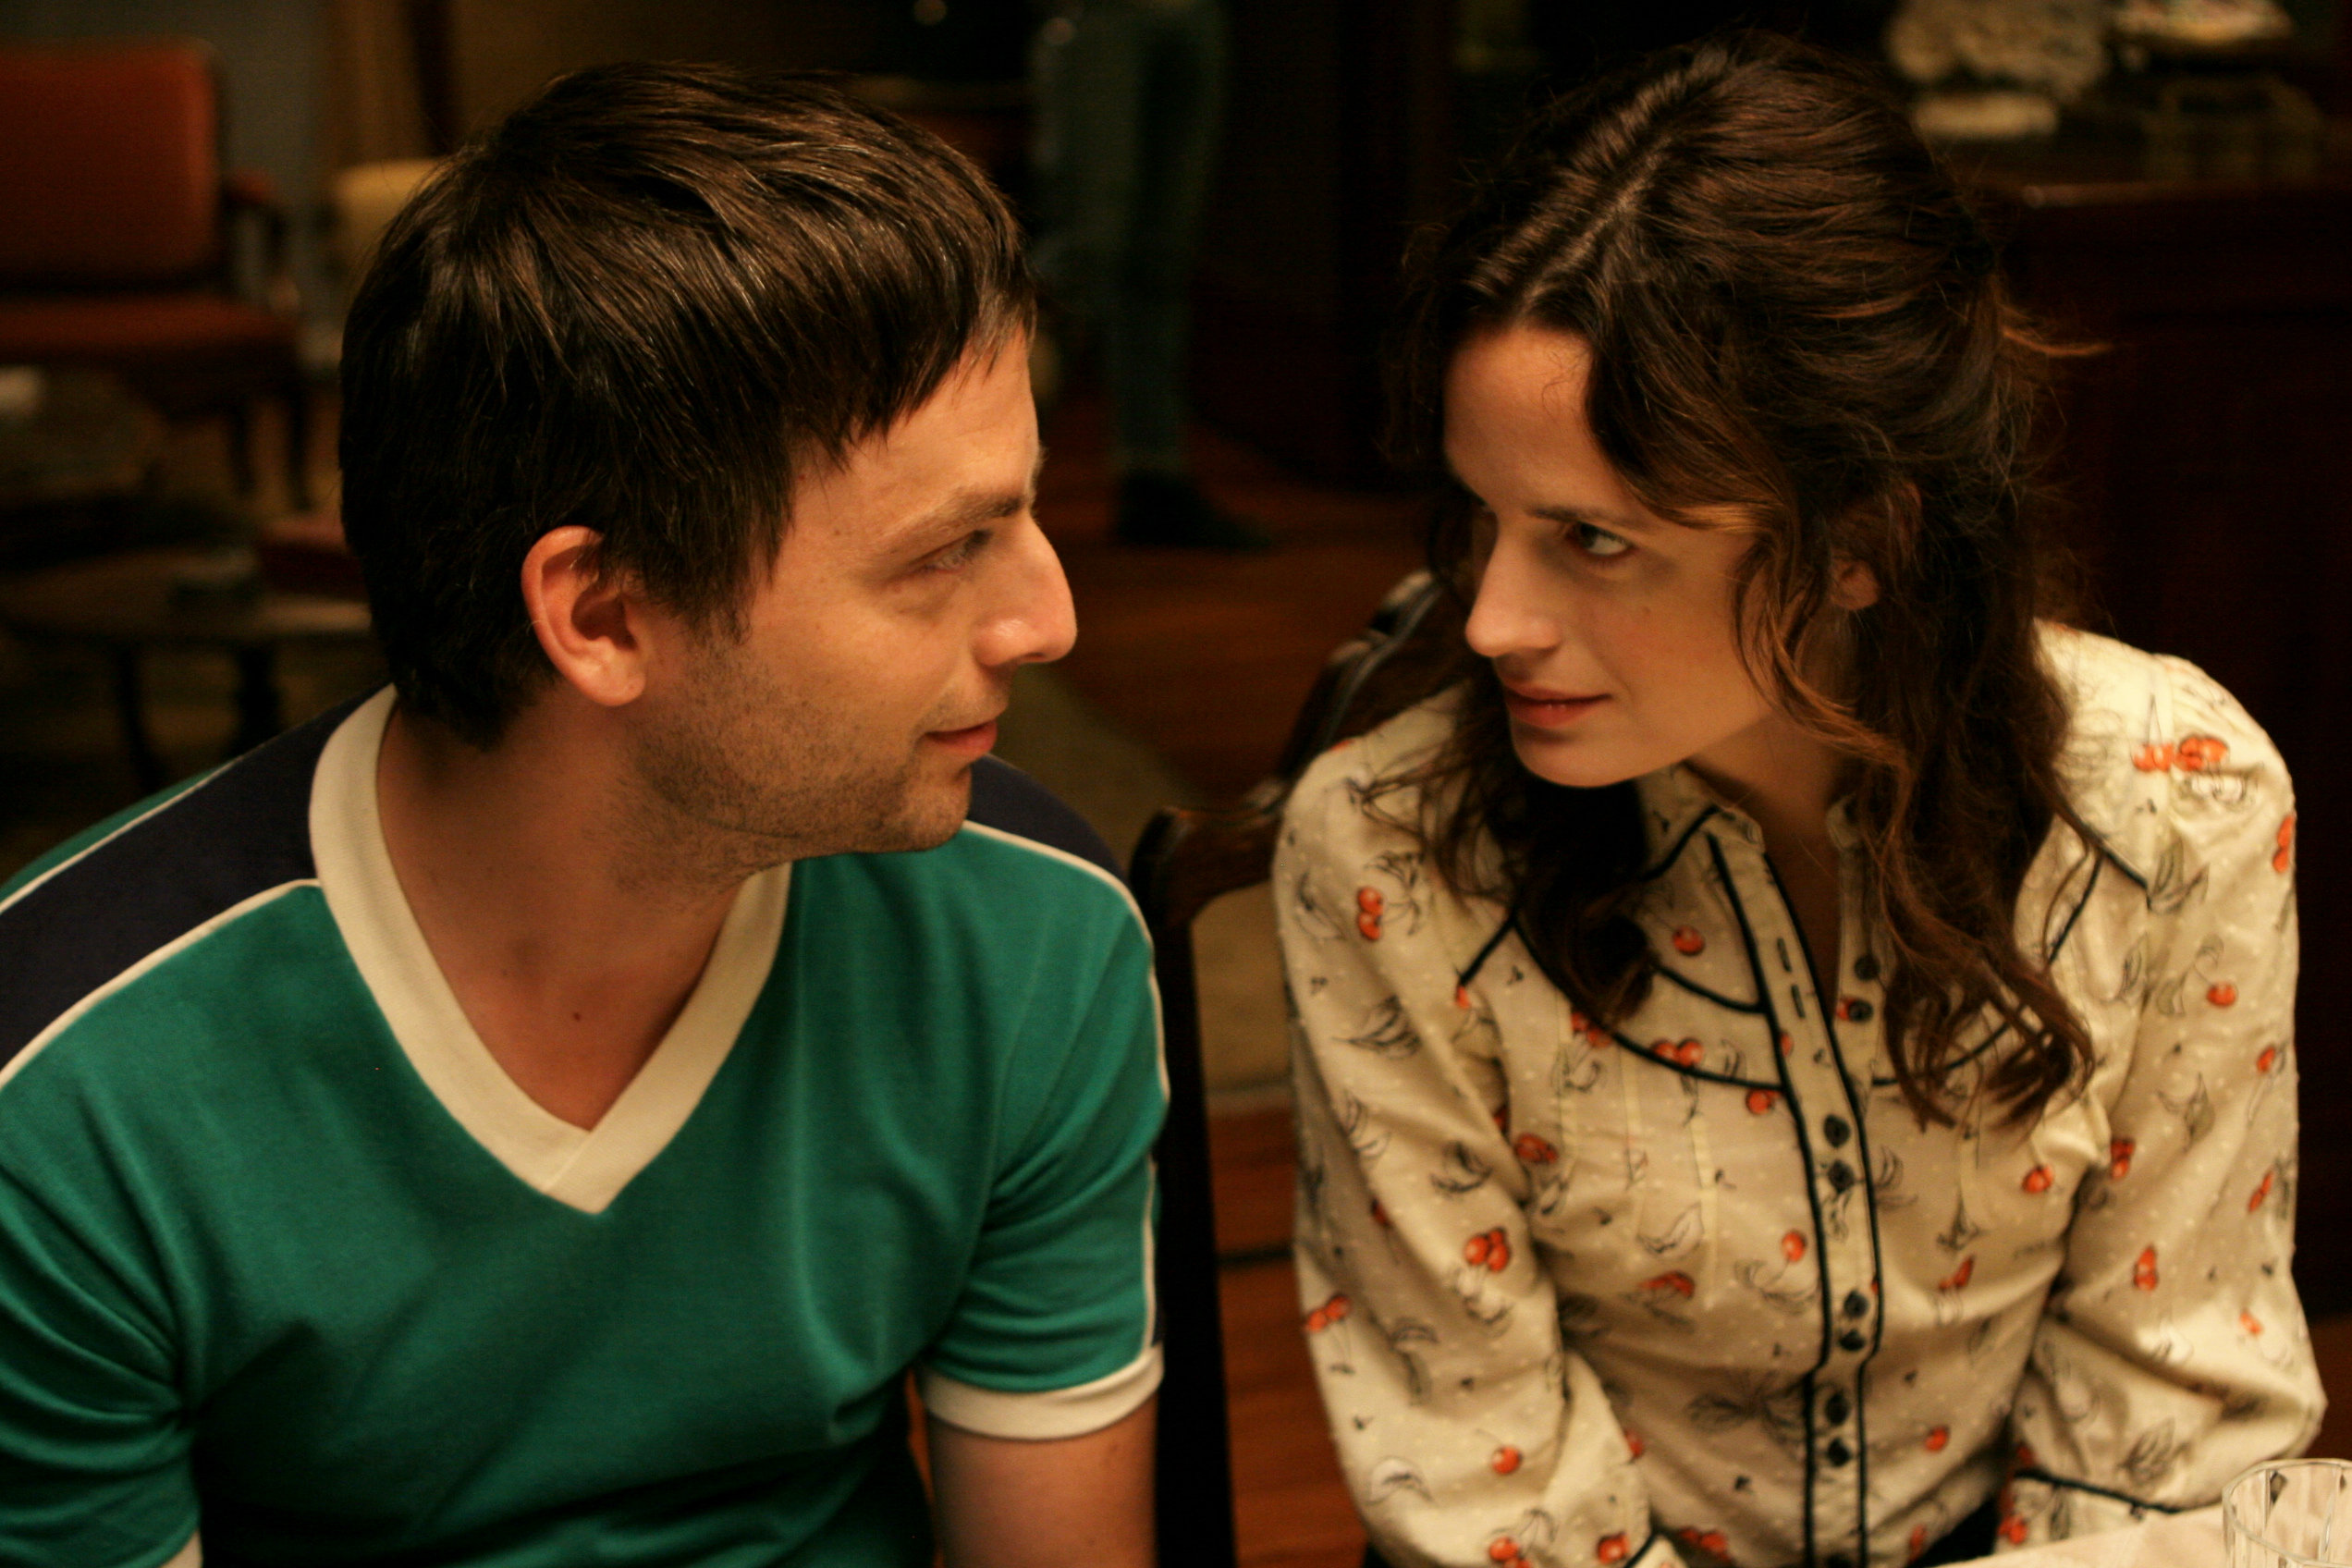 Justin Kirk stars as Jeff Kane and Elizabeth Reaser stars as Liz Clarke in Ambush Entertainment's Against the Current (2009)